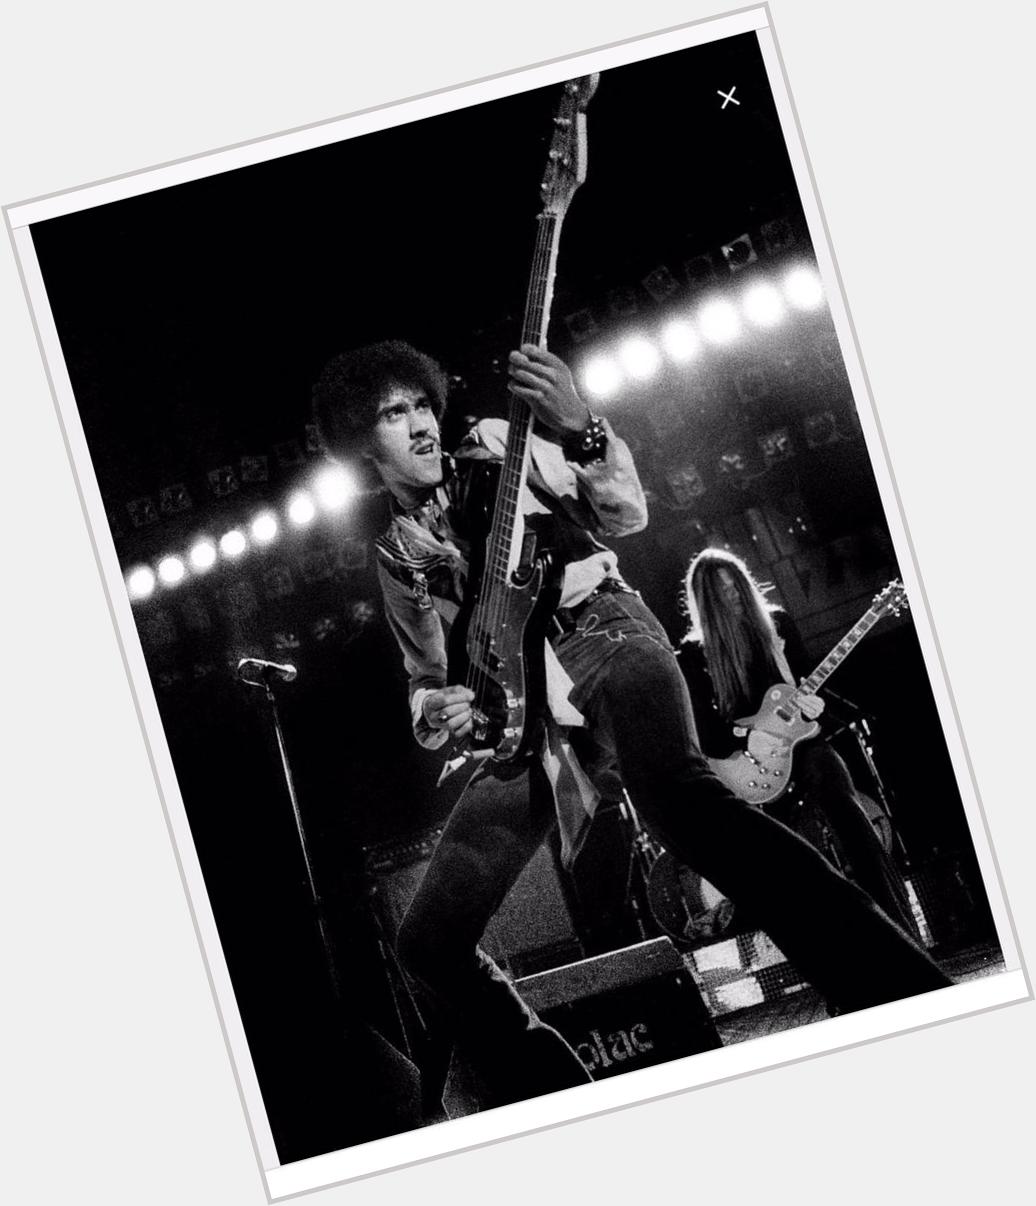 A happy Birthday to the late great Phil Lynott!!! RIP 